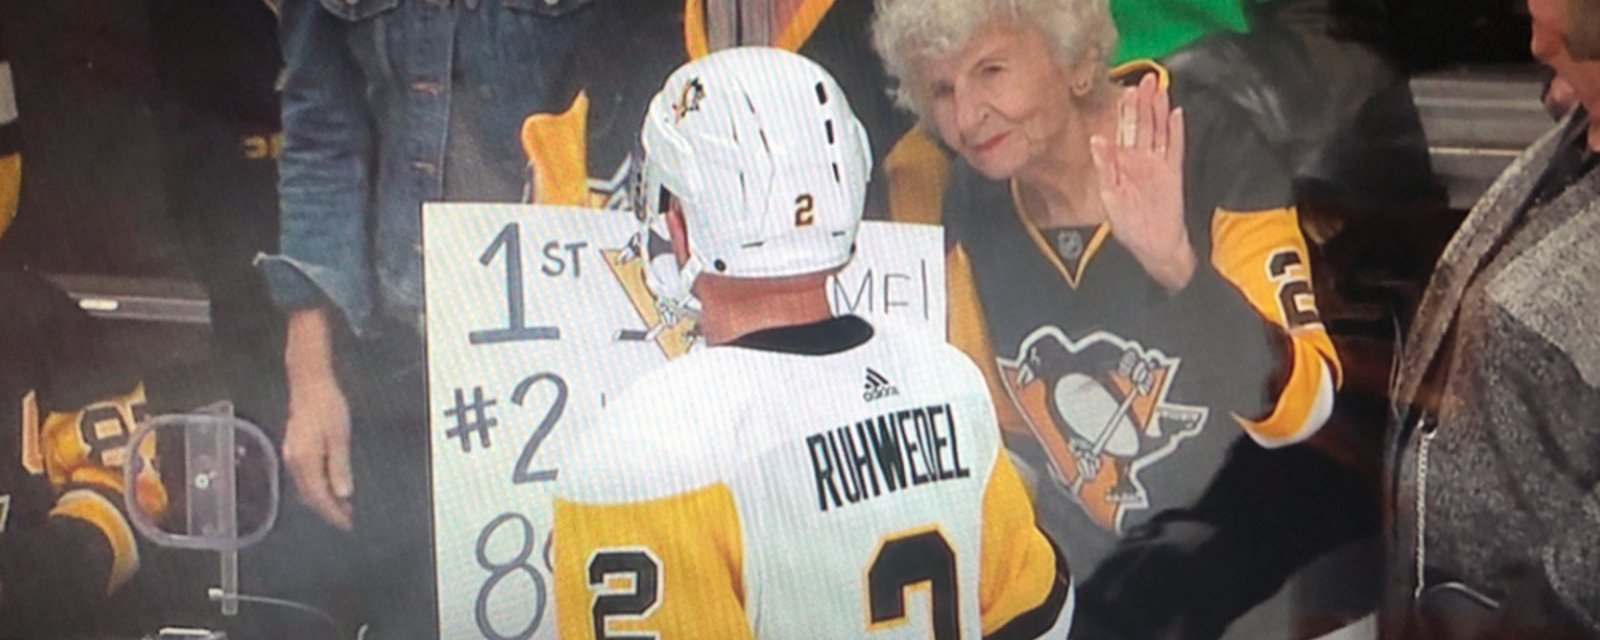 Ruhwedel shares a special moment with his 89 year old grandmother prior to puck drop